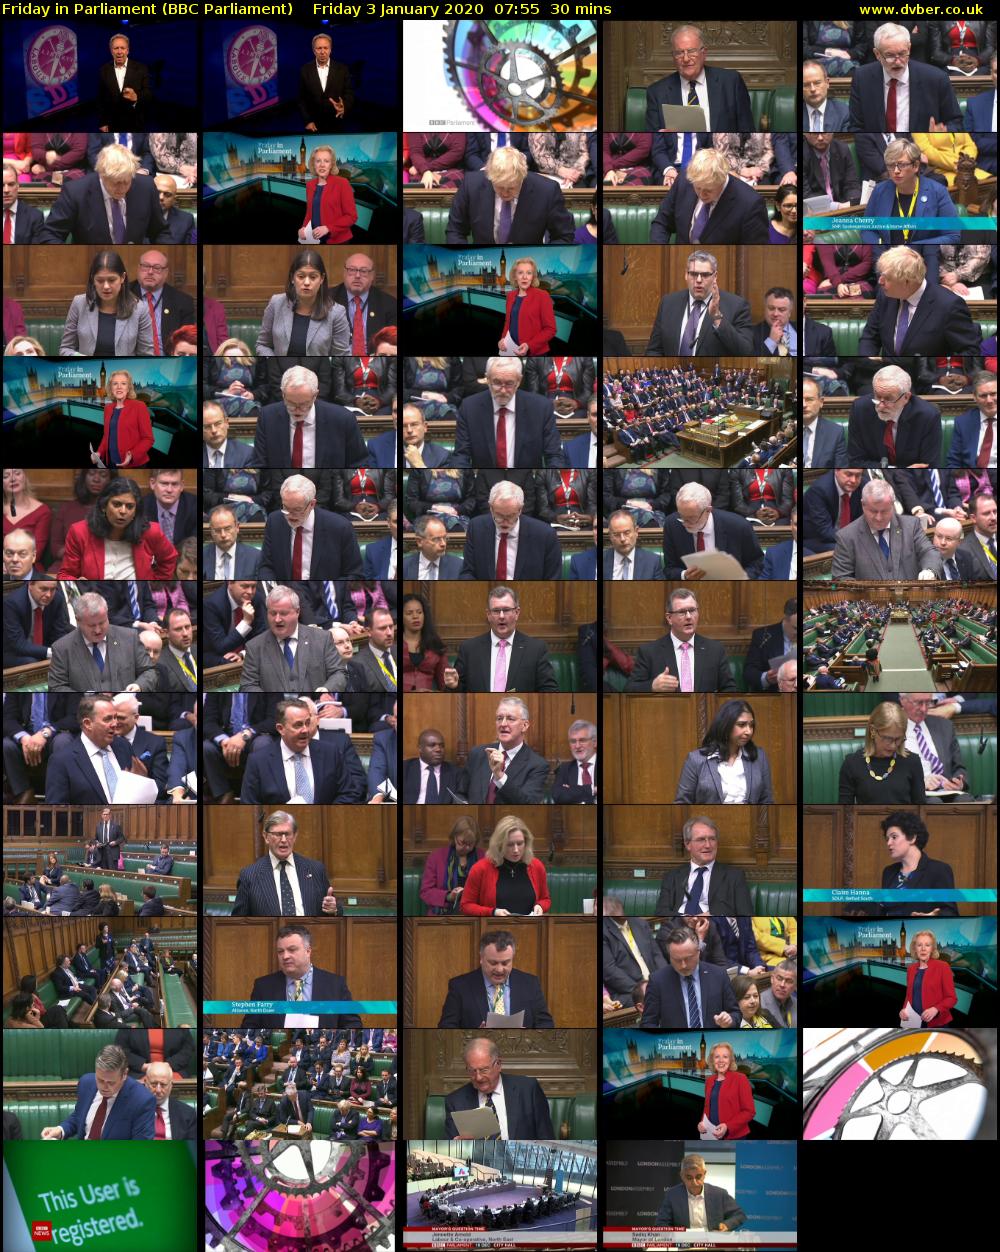 Friday in Parliament (BBC Parliament) Friday 3 January 2020 07:55 - 08:25